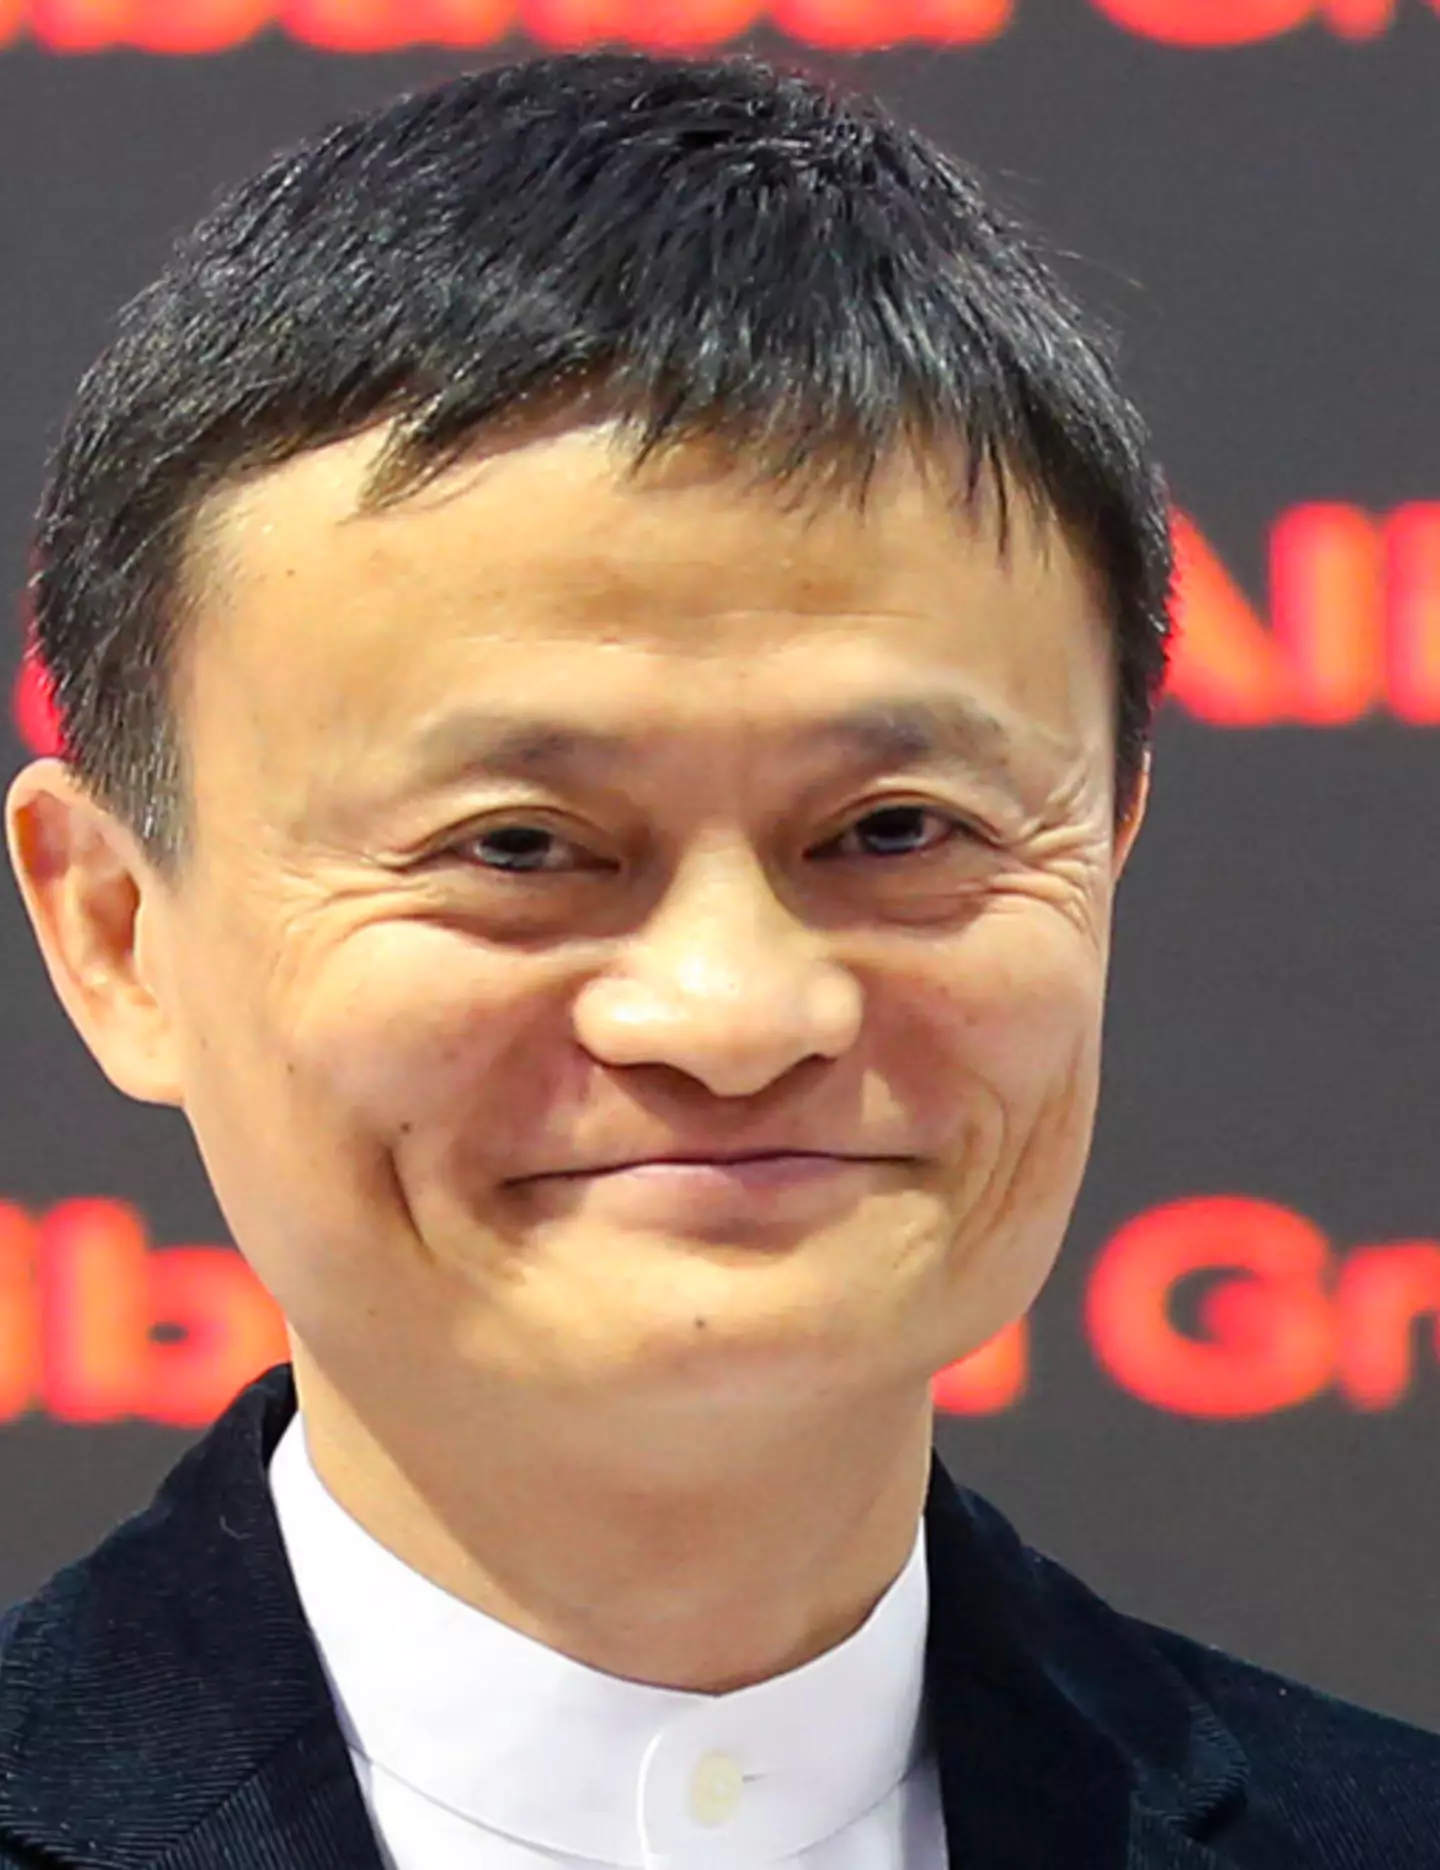 Jack Ma was once China's richest person.